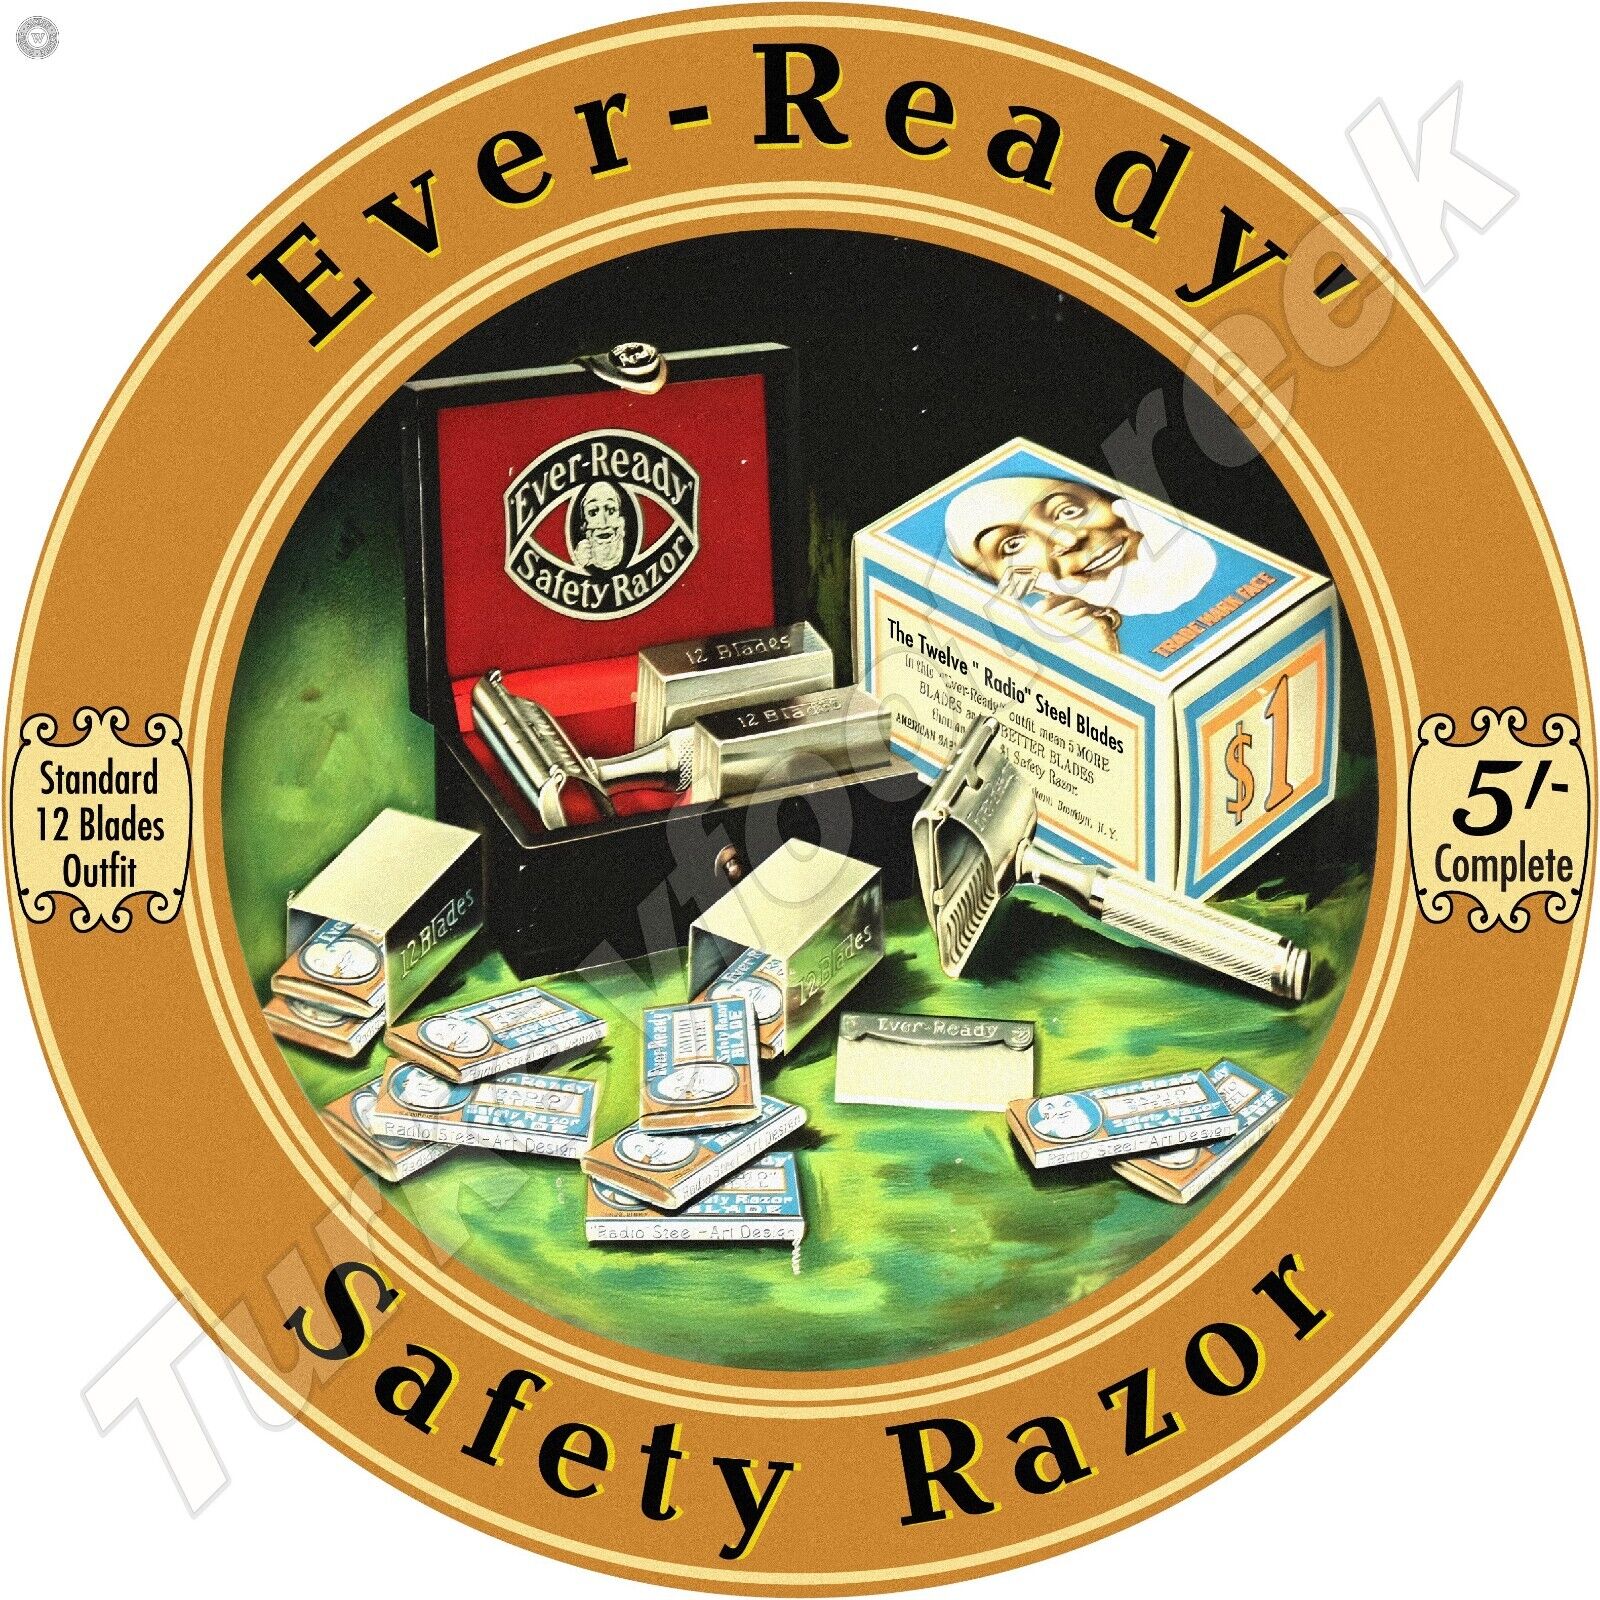 Ever-Ready Safety Razor Round Metal Sign 2 Sizes To Choose From